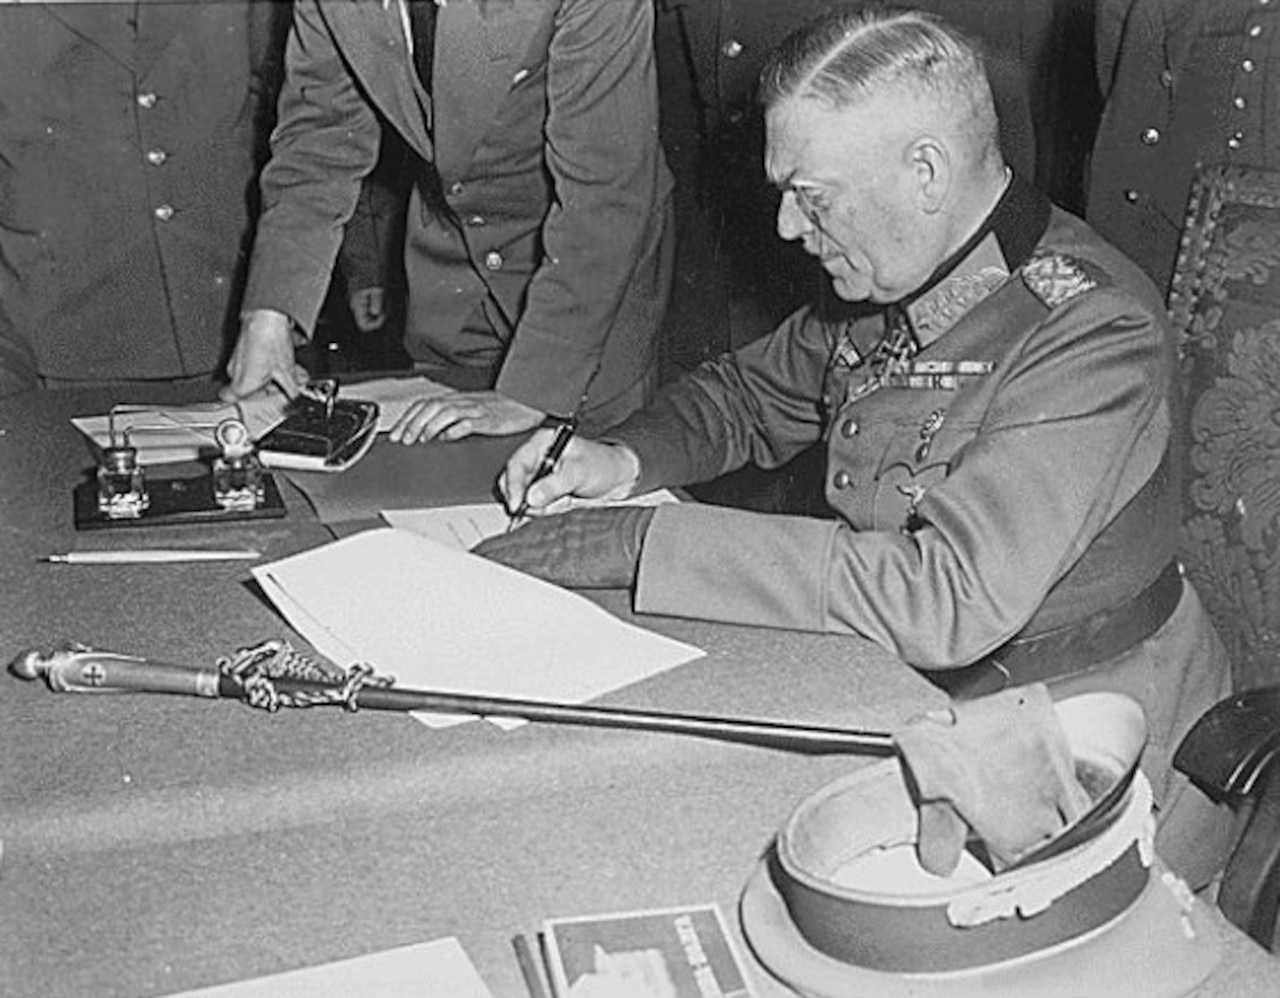 A military man signs some papers while others look on.